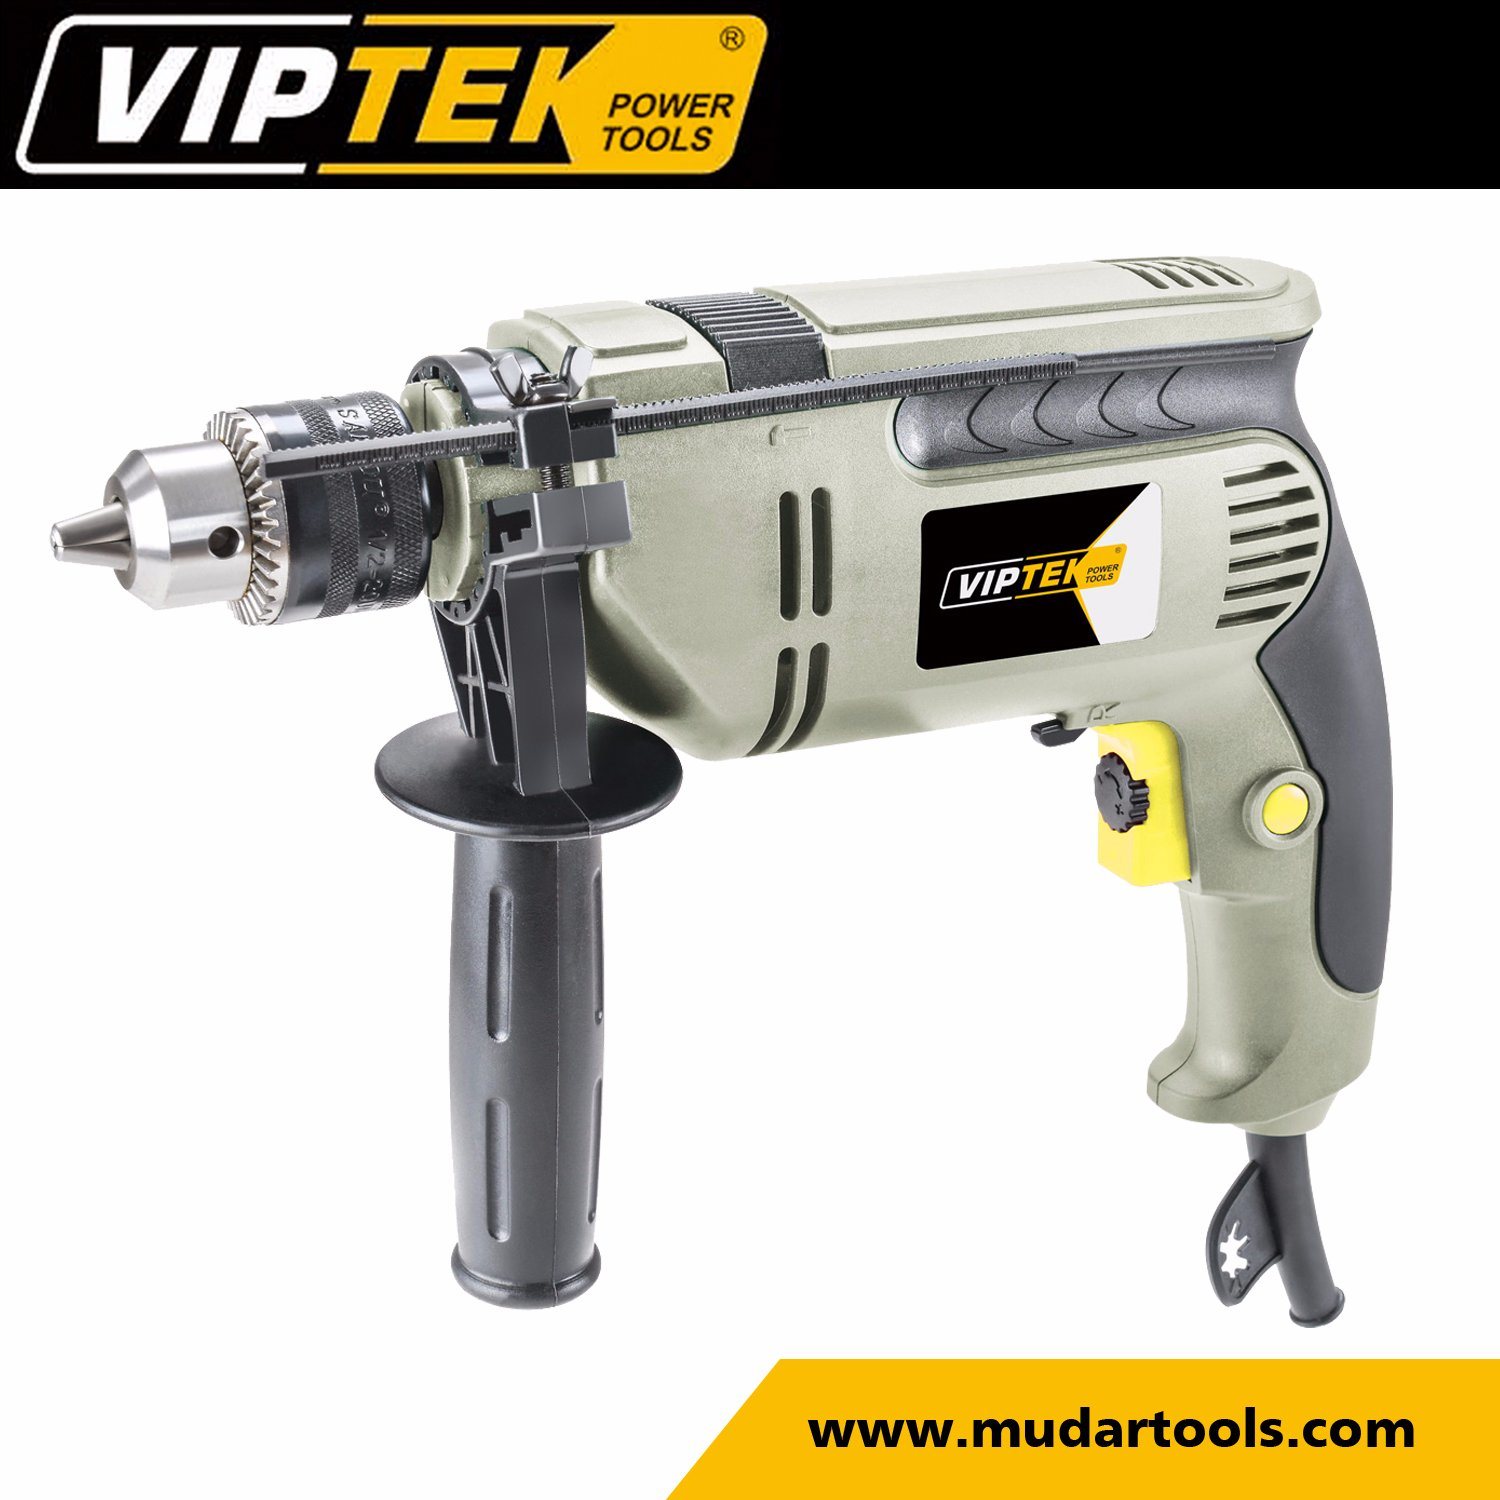 800W Power Tools Drilling Machine Electric Impact Drill